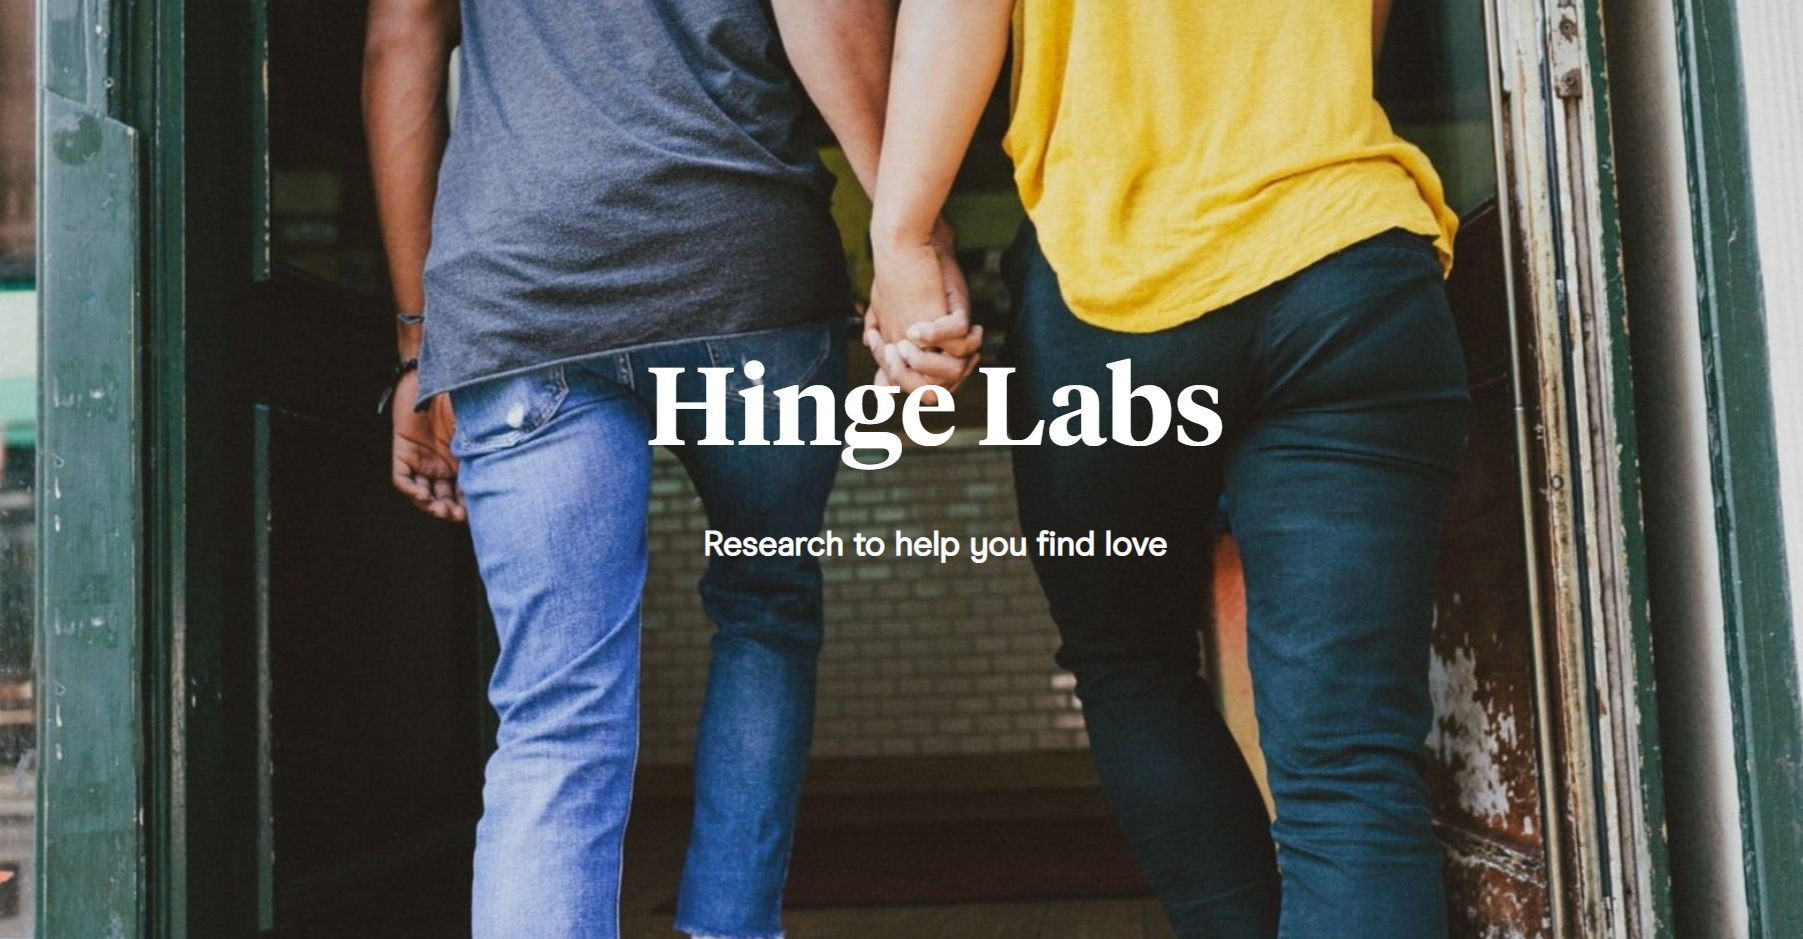 Let’s Make It Clear: Hinge Pros, Cons and Best Features